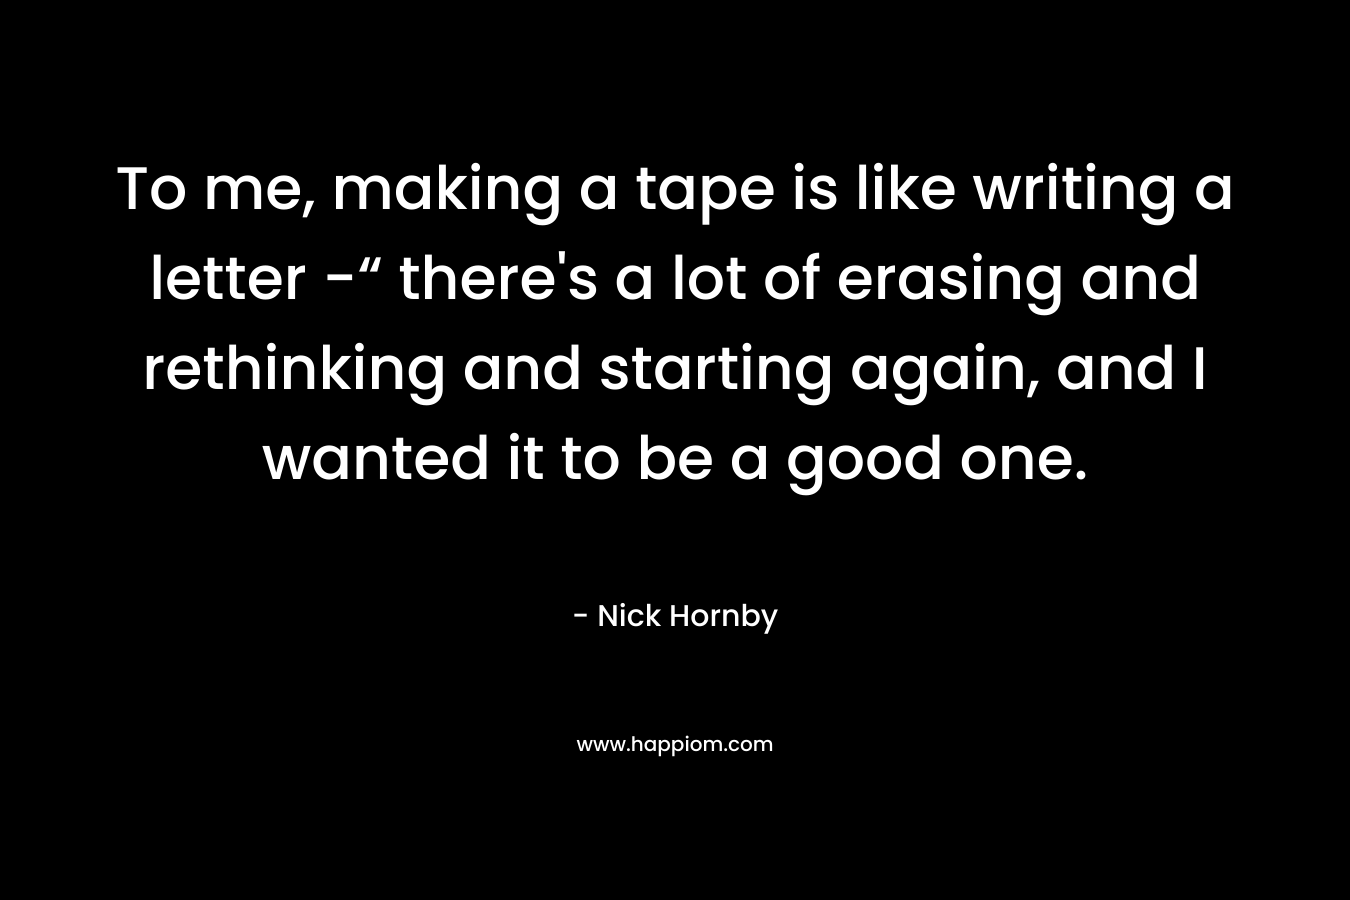 To me, making a tape is like writing a letter -“ there's a lot of erasing and rethinking and starting again, and I wanted it to be a good one.